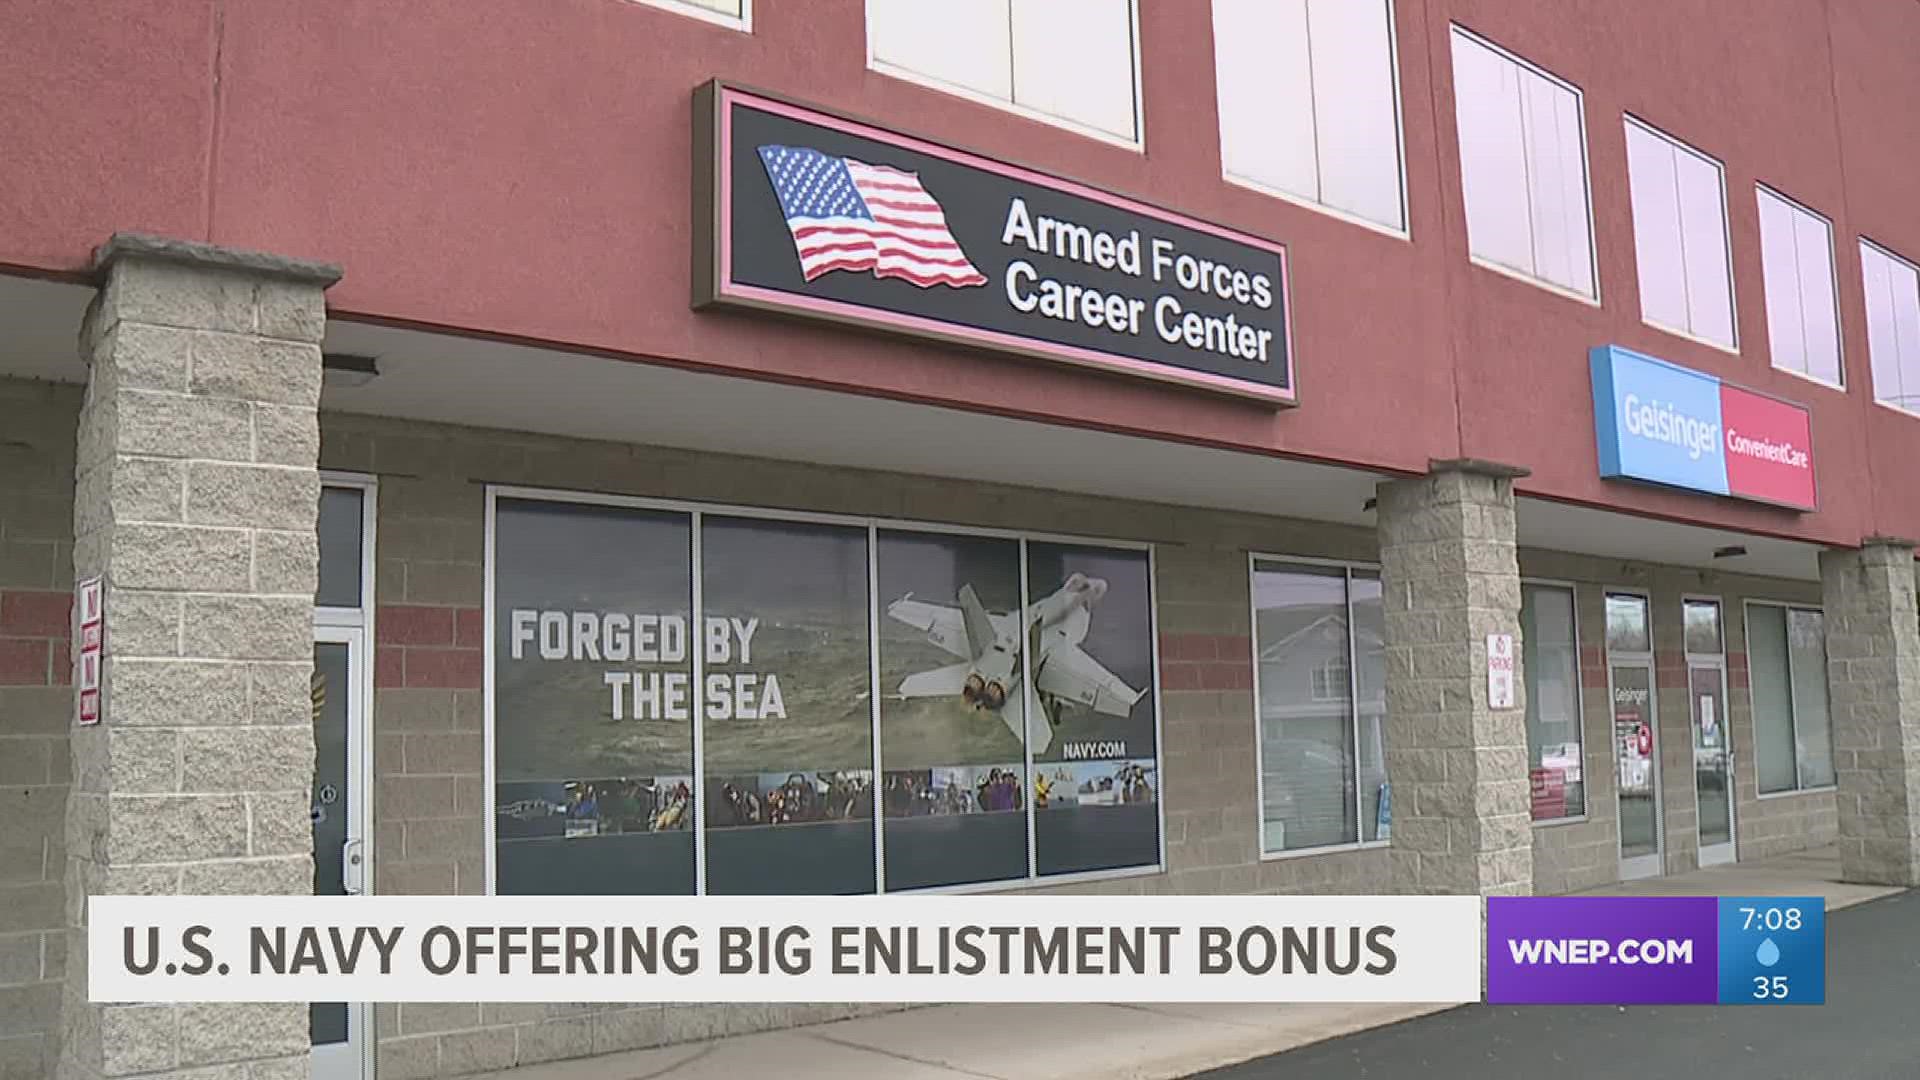 Navy recruiters in Scranton say newly enlisted could get a $25,000 bonus if they qualify for certain programs.